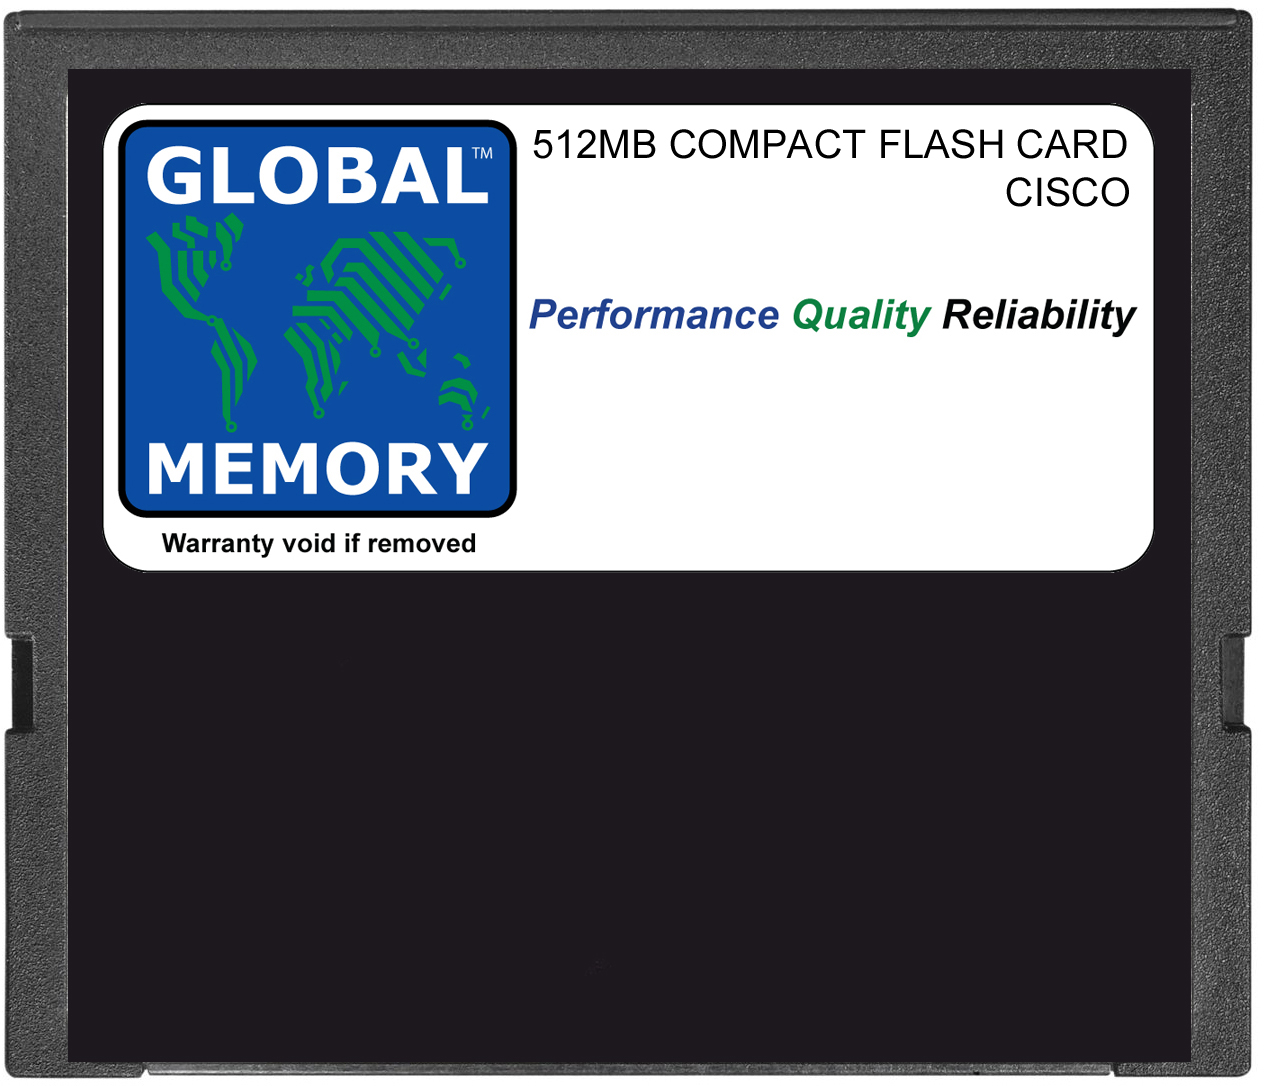 512MB COMPACT FLASH CARD MEMORY FOR CISCO 3800 SERIES ROUTERS (MEM3800-512CF)